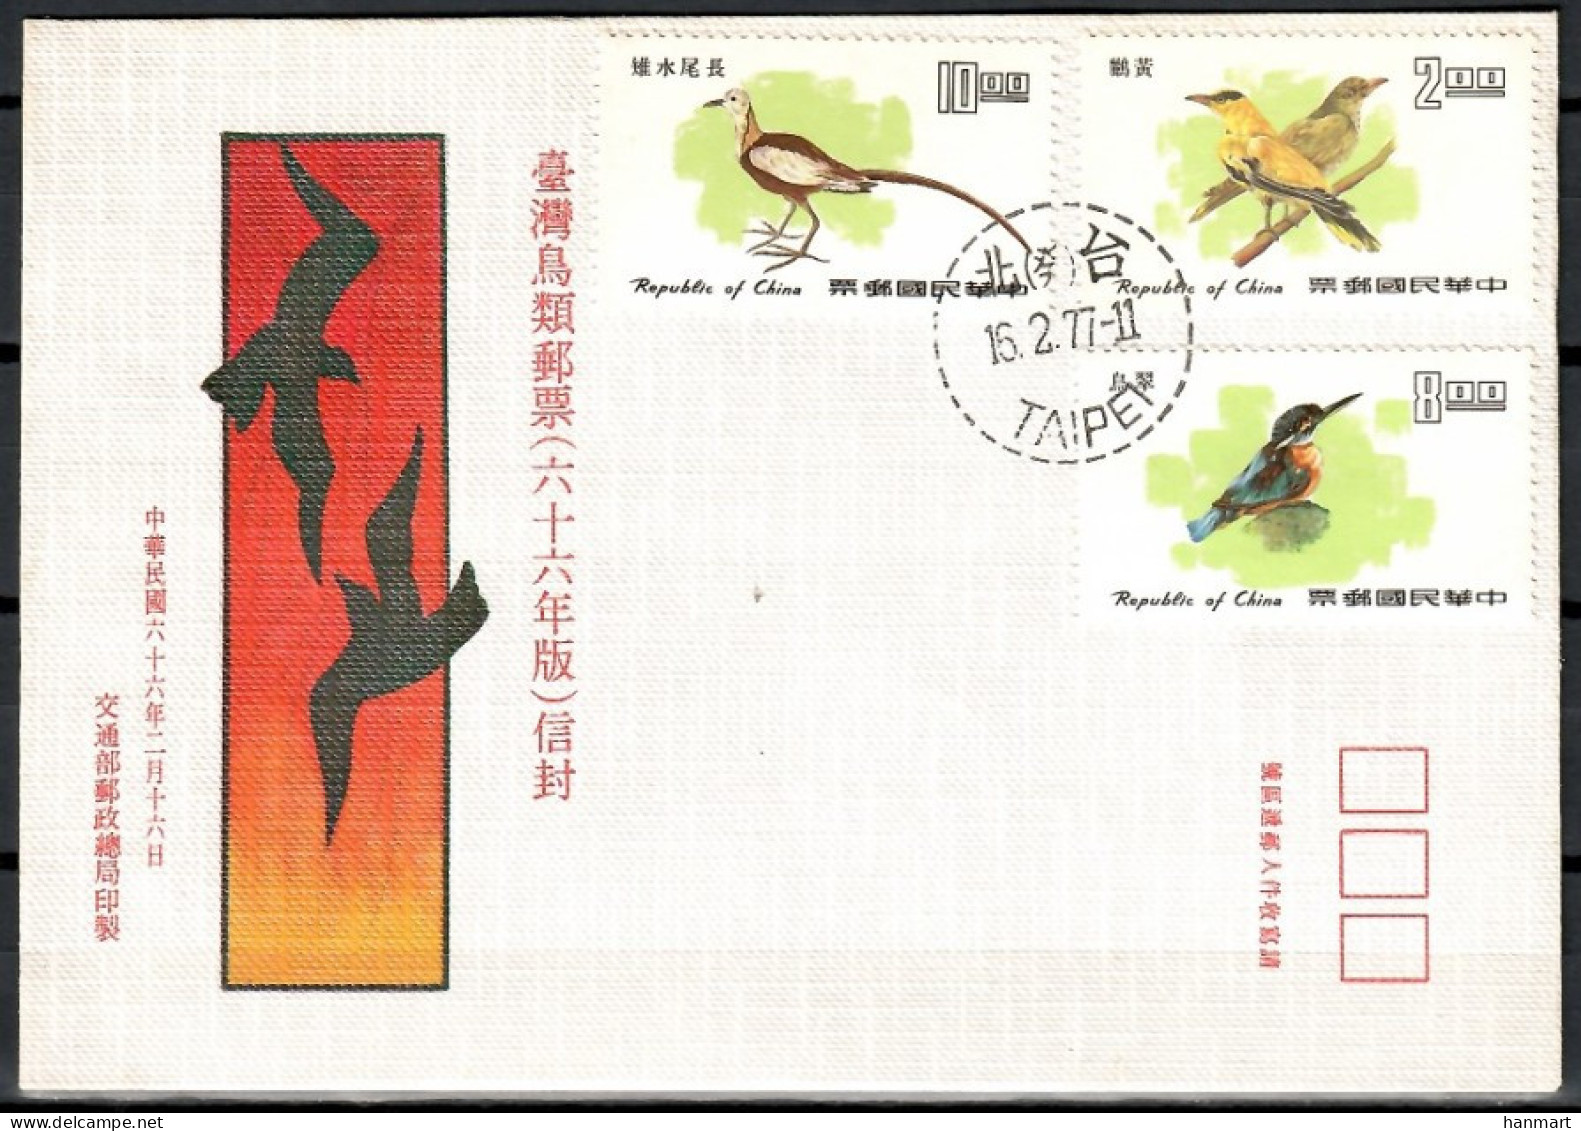 Taiwan (Republic Of China) 1977 Mi 1173-1175 FDC  (FDC ZS9 FRM1173-1175) - Autres